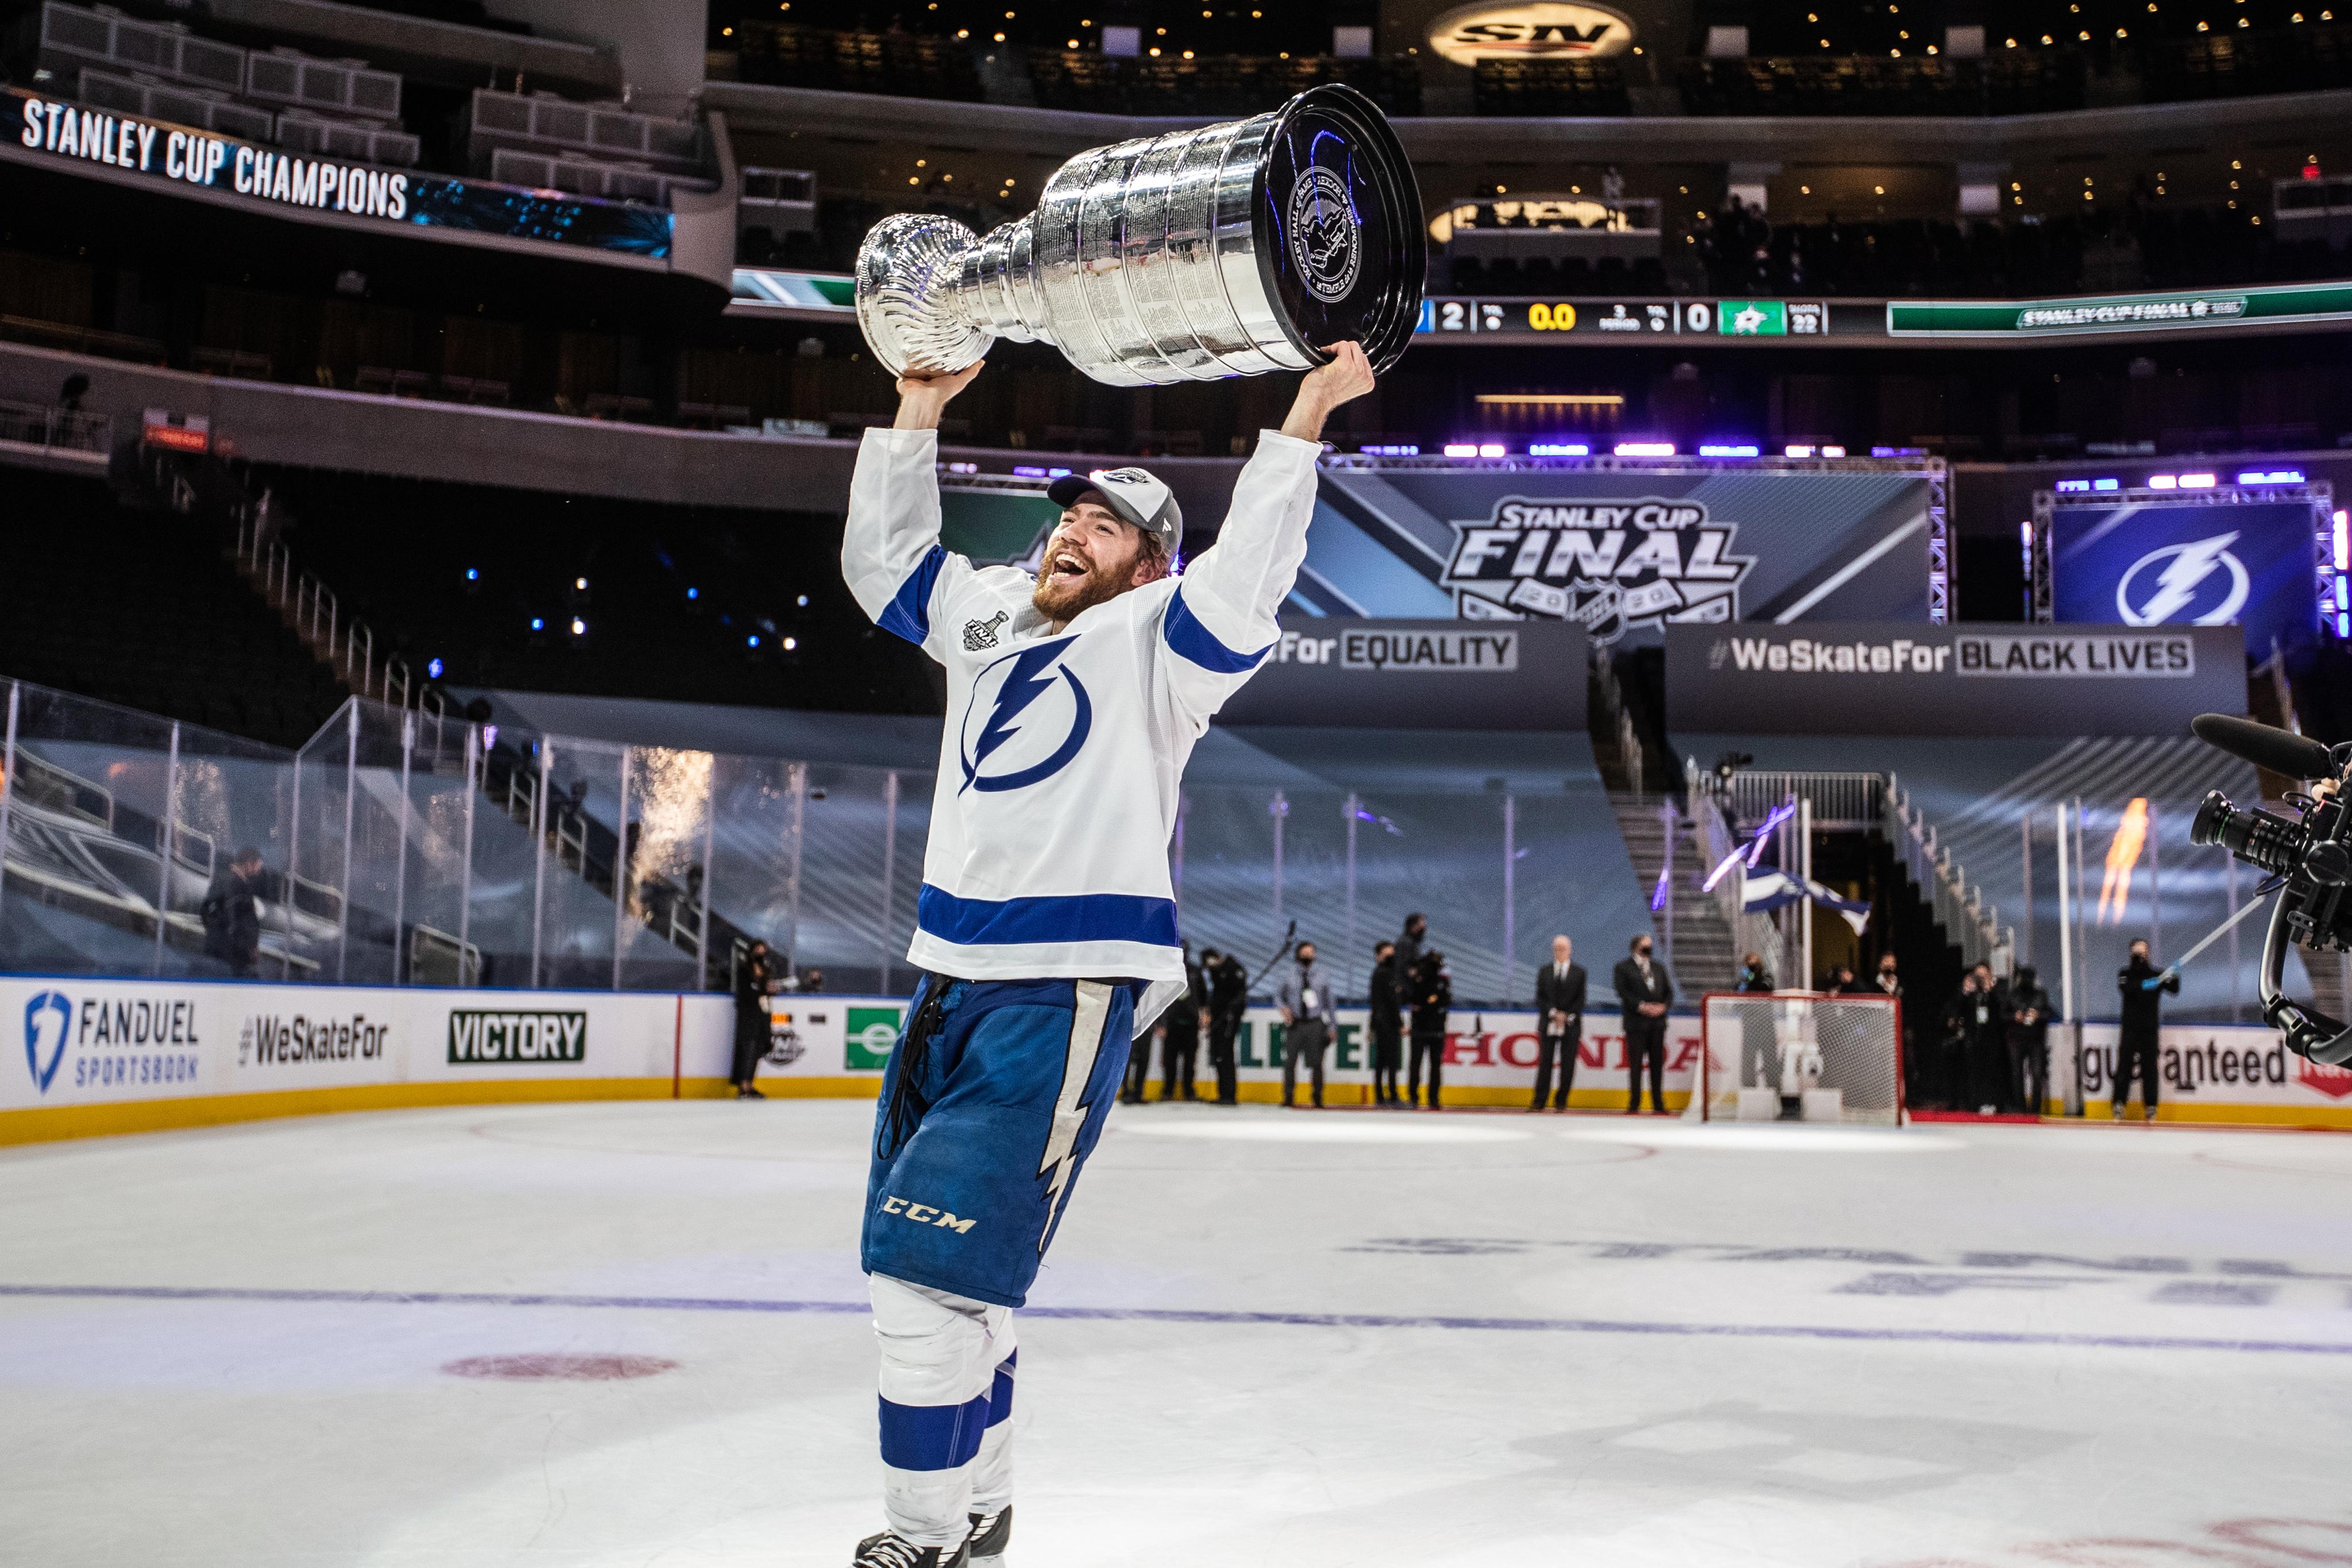 Tampa Bay Lightning's quest for three Stanley Cup championships in